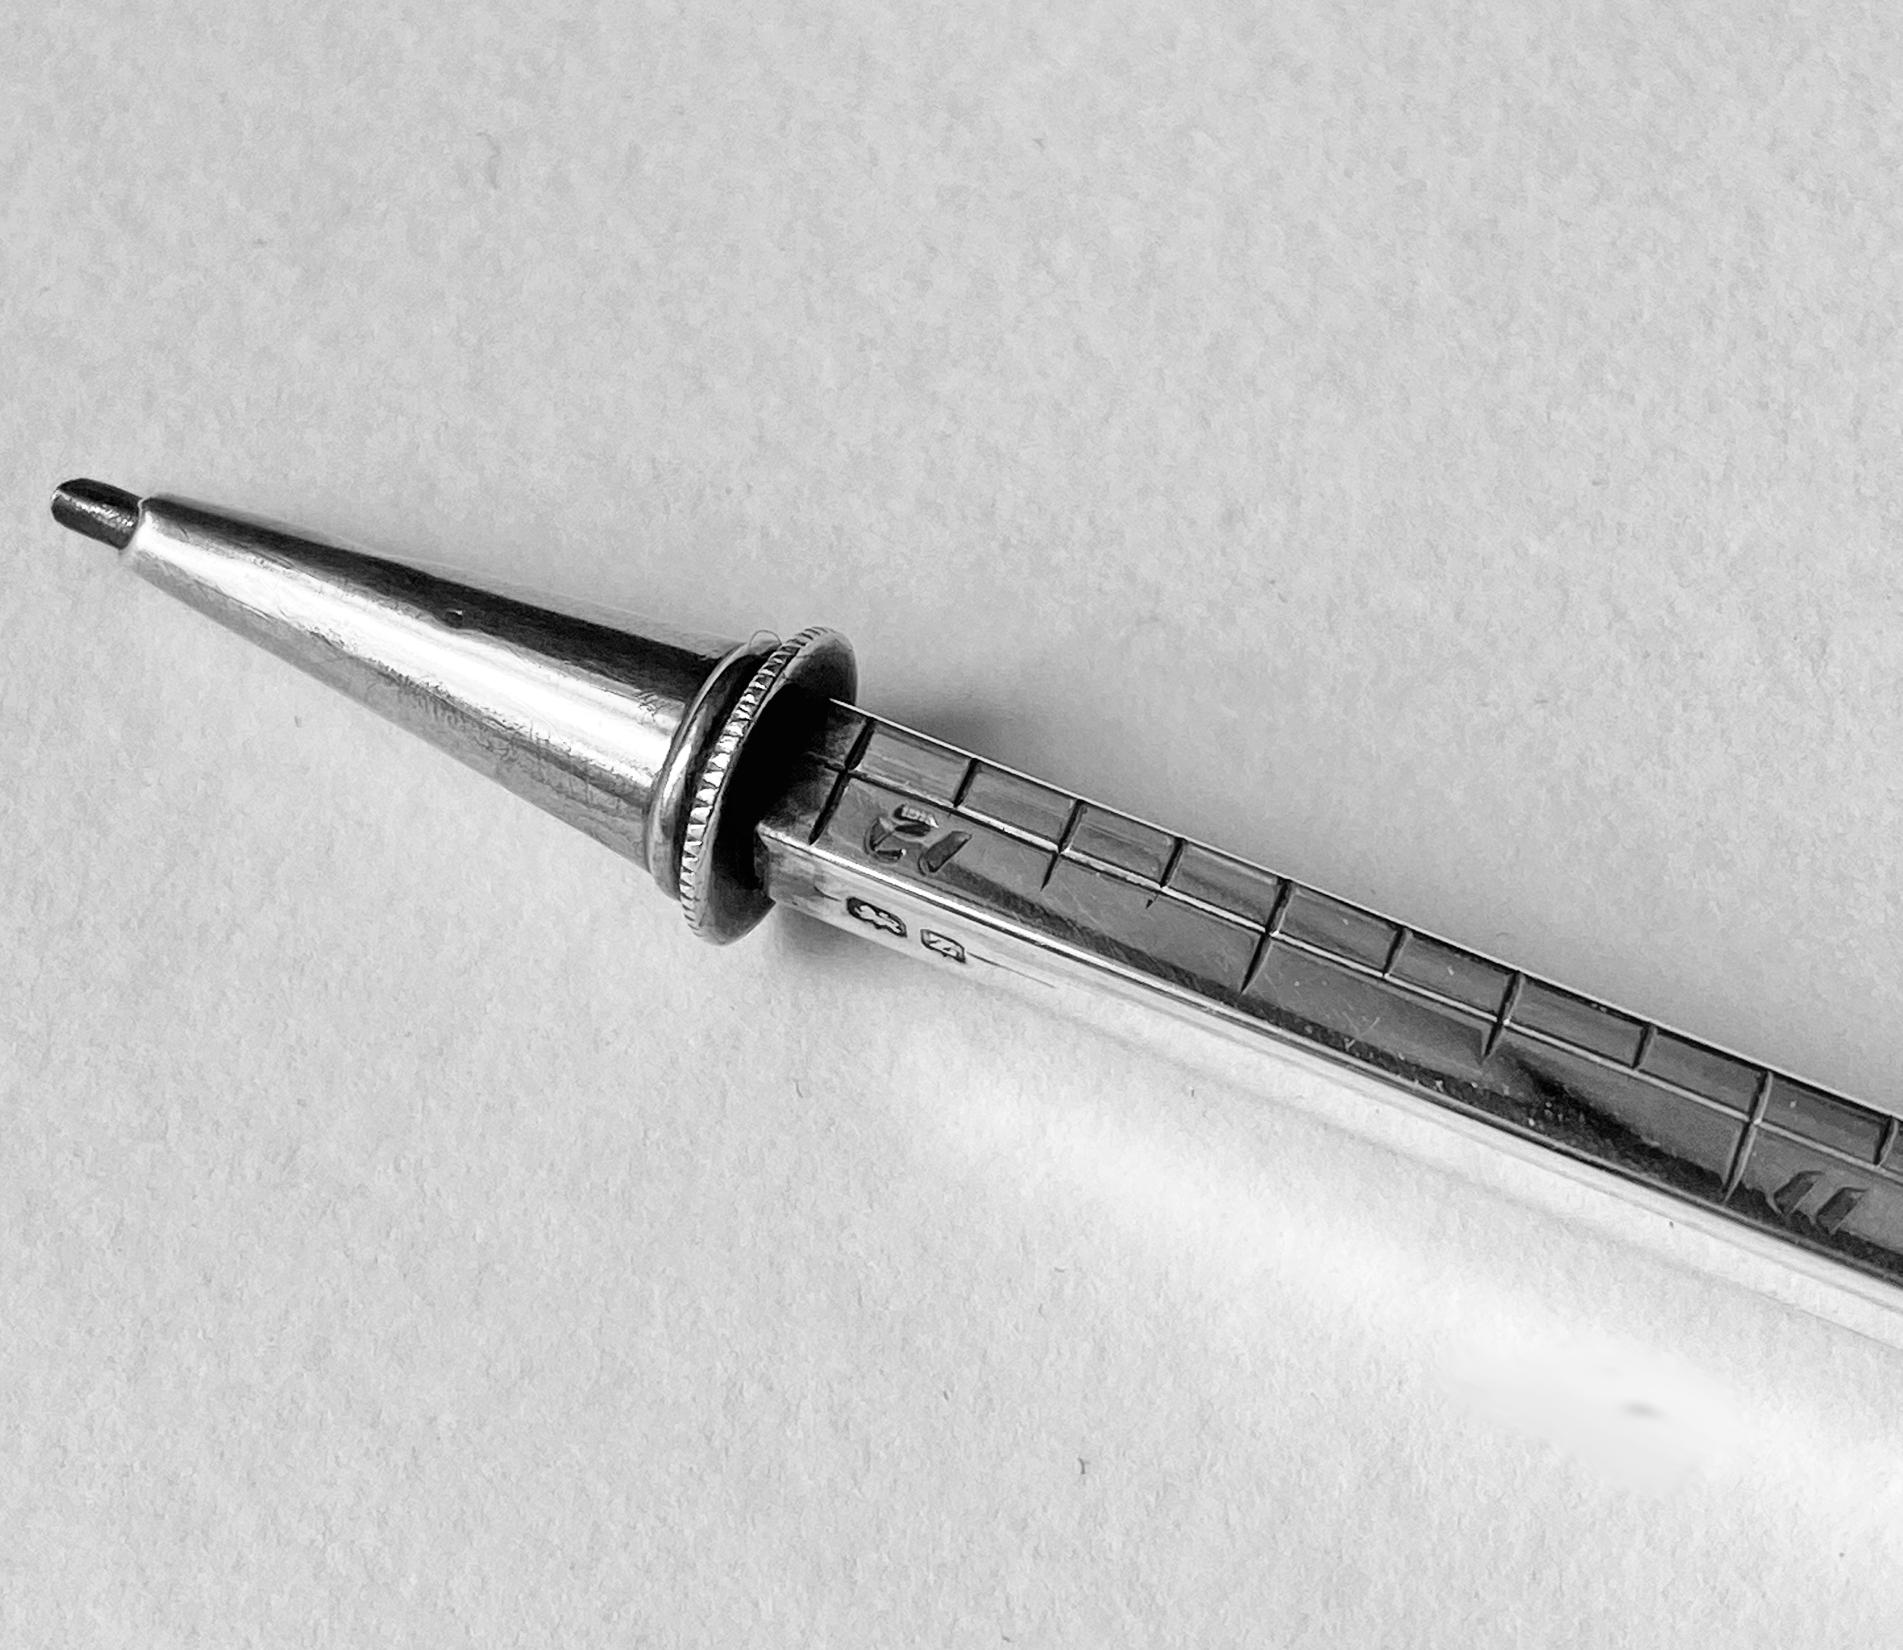 British Antique Sterling Silver Ruler and Pencil, Birmingham, 1924